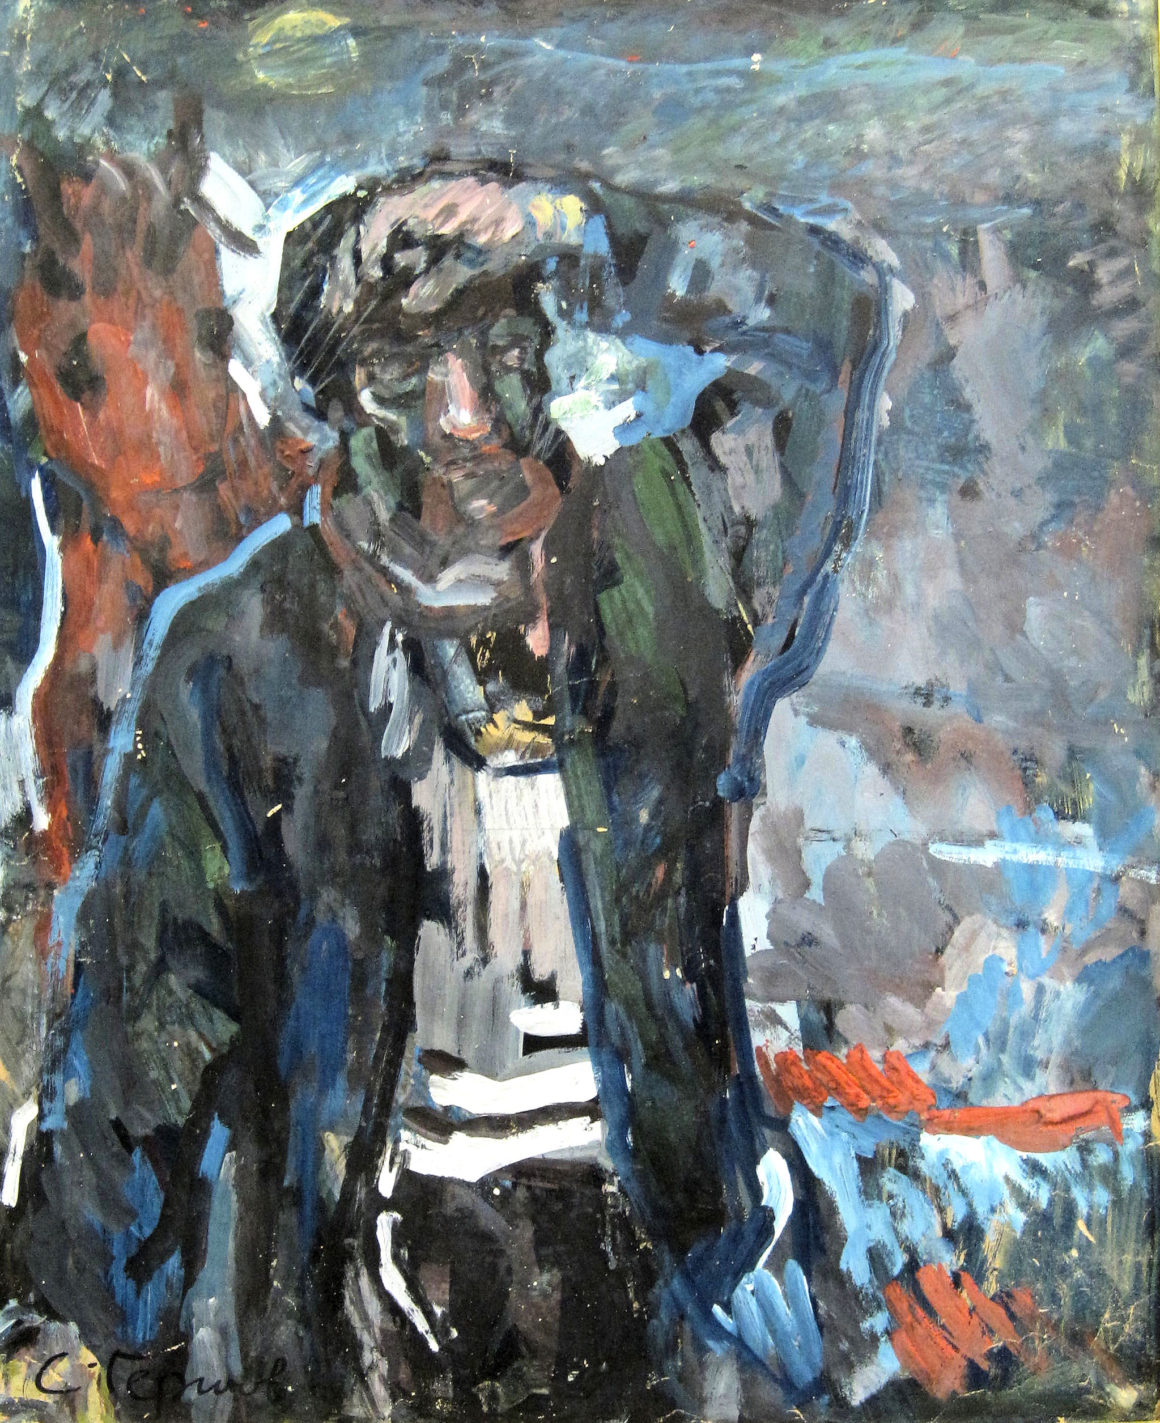 Solomon Gershov (Russian, 1906-1989) , Tevye, 1963-1964, gouache on paper, 26 x 22 in. The Art Collection at The Hebrew Home at Riverdale.